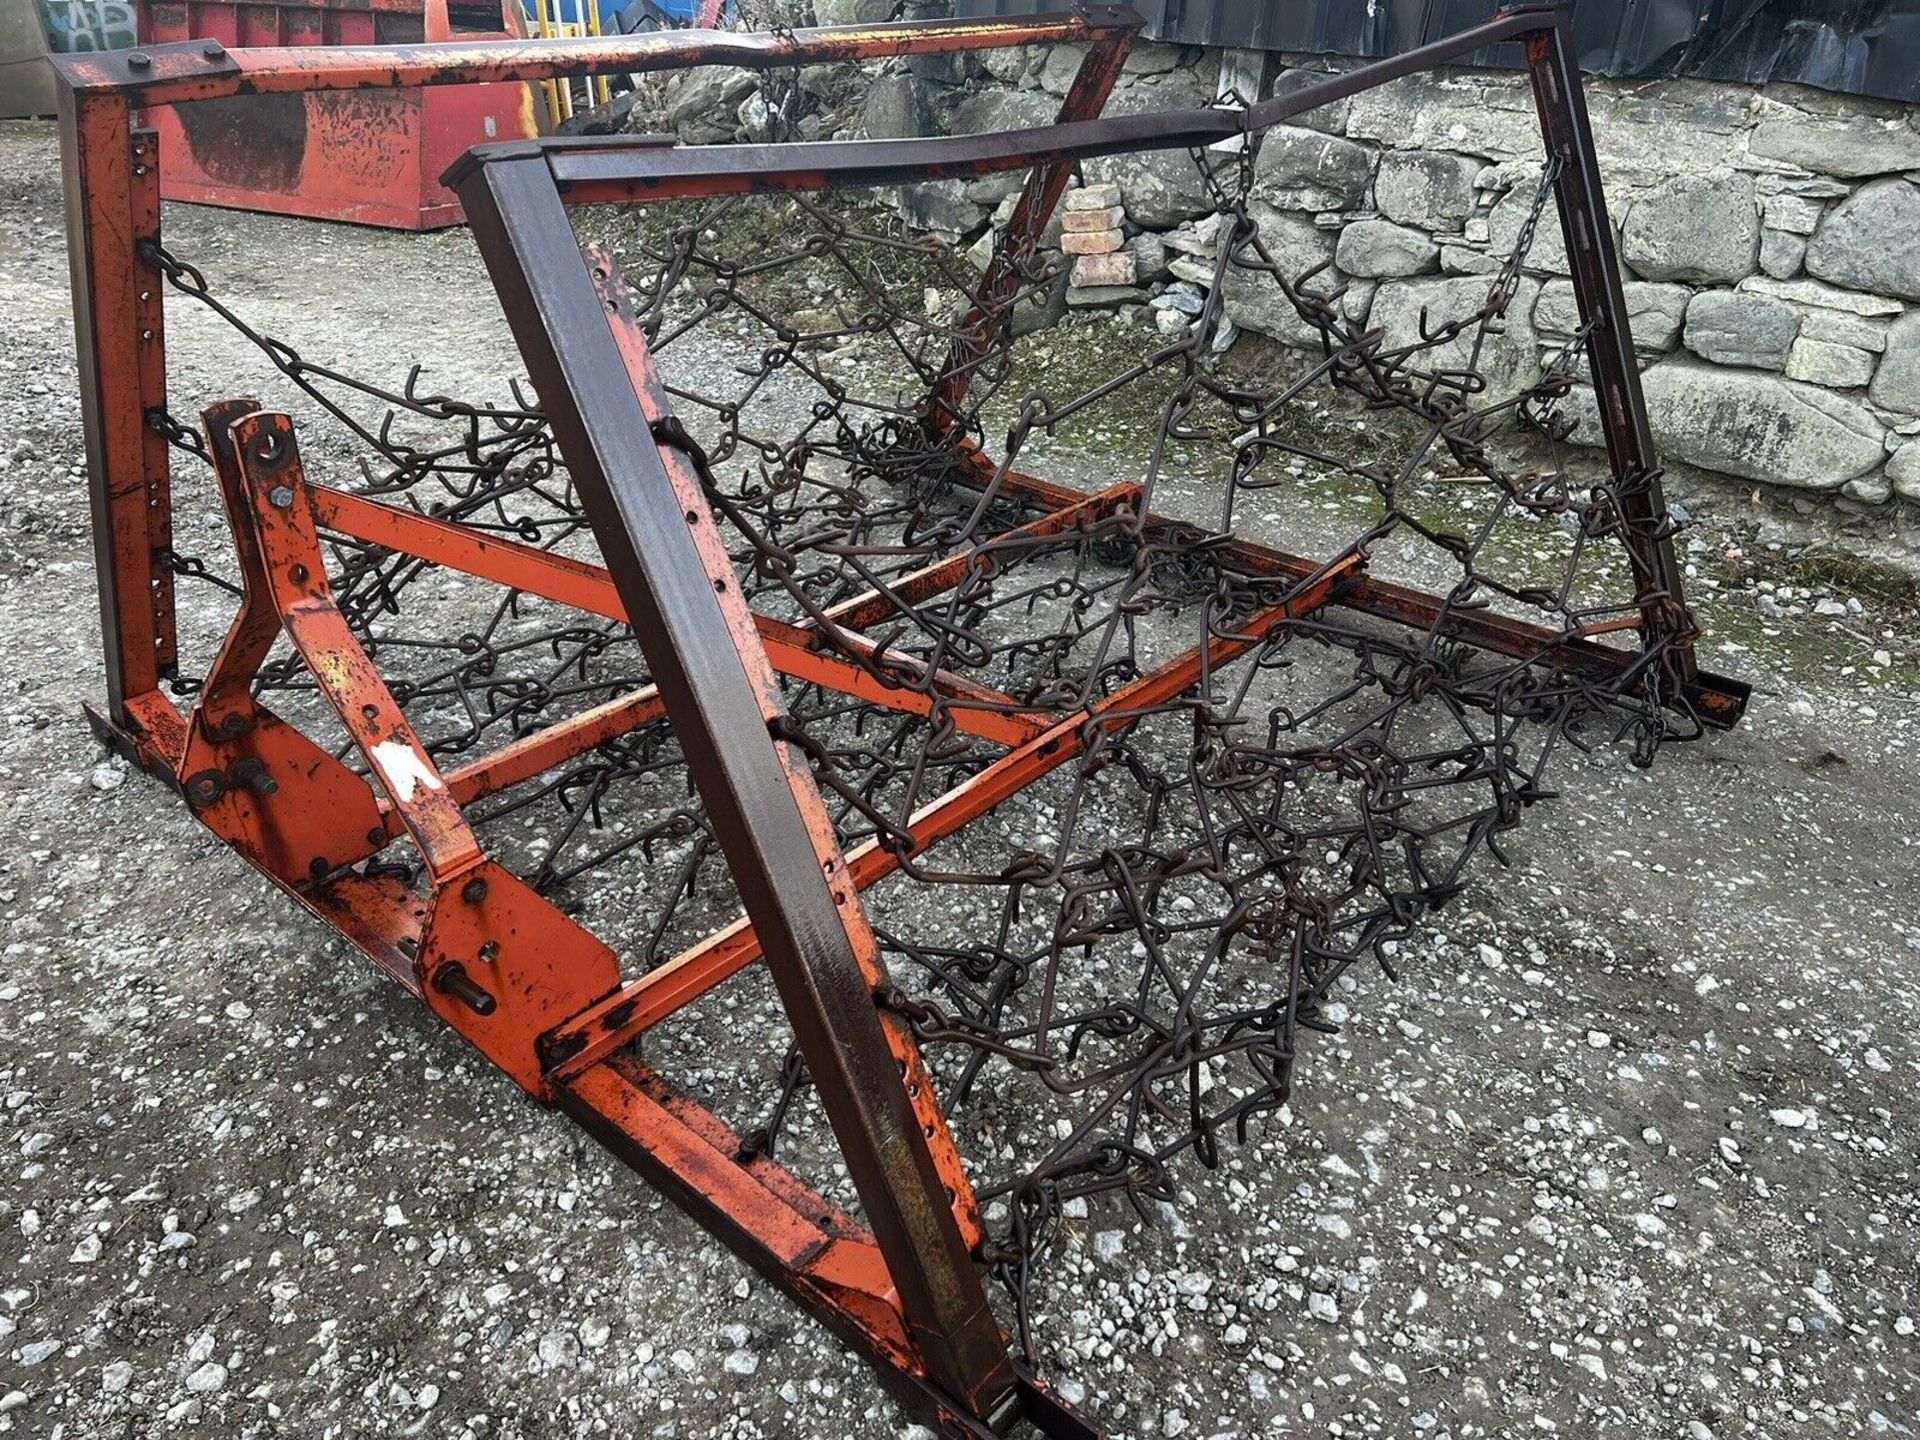 PARMITER 16 FT CHAIN HARROWS - Image 5 of 5